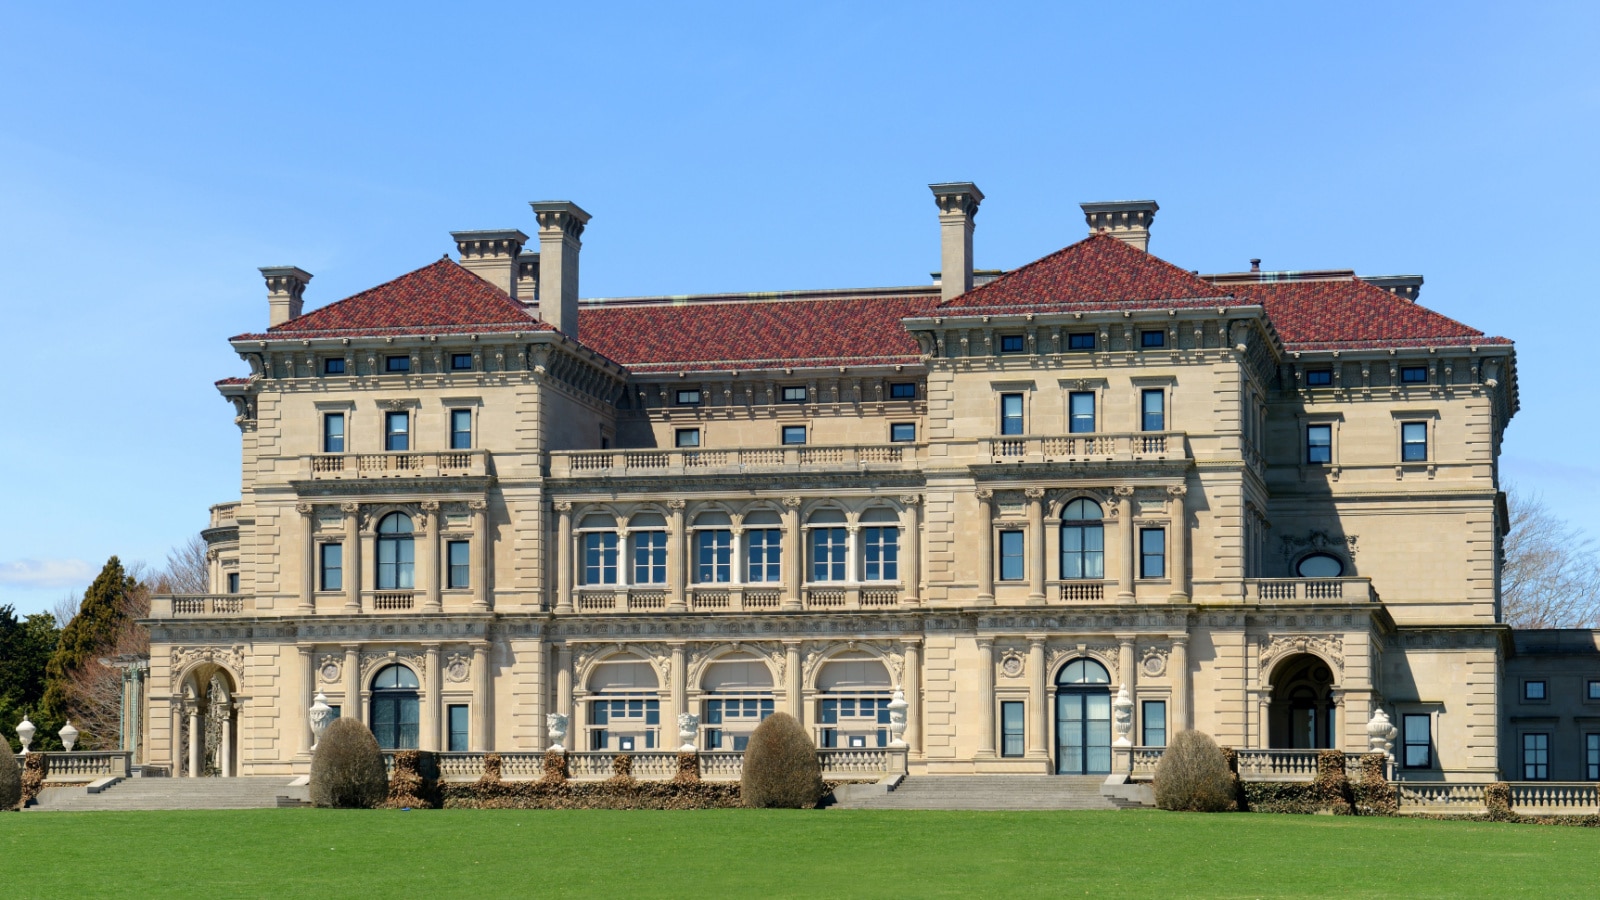 The Breakers is a one of the most fabulous mansion built in 1893 for Cornelius Vanderbilt and his family in Newport, Rhode Island, USA. This mansion is open to the public today.